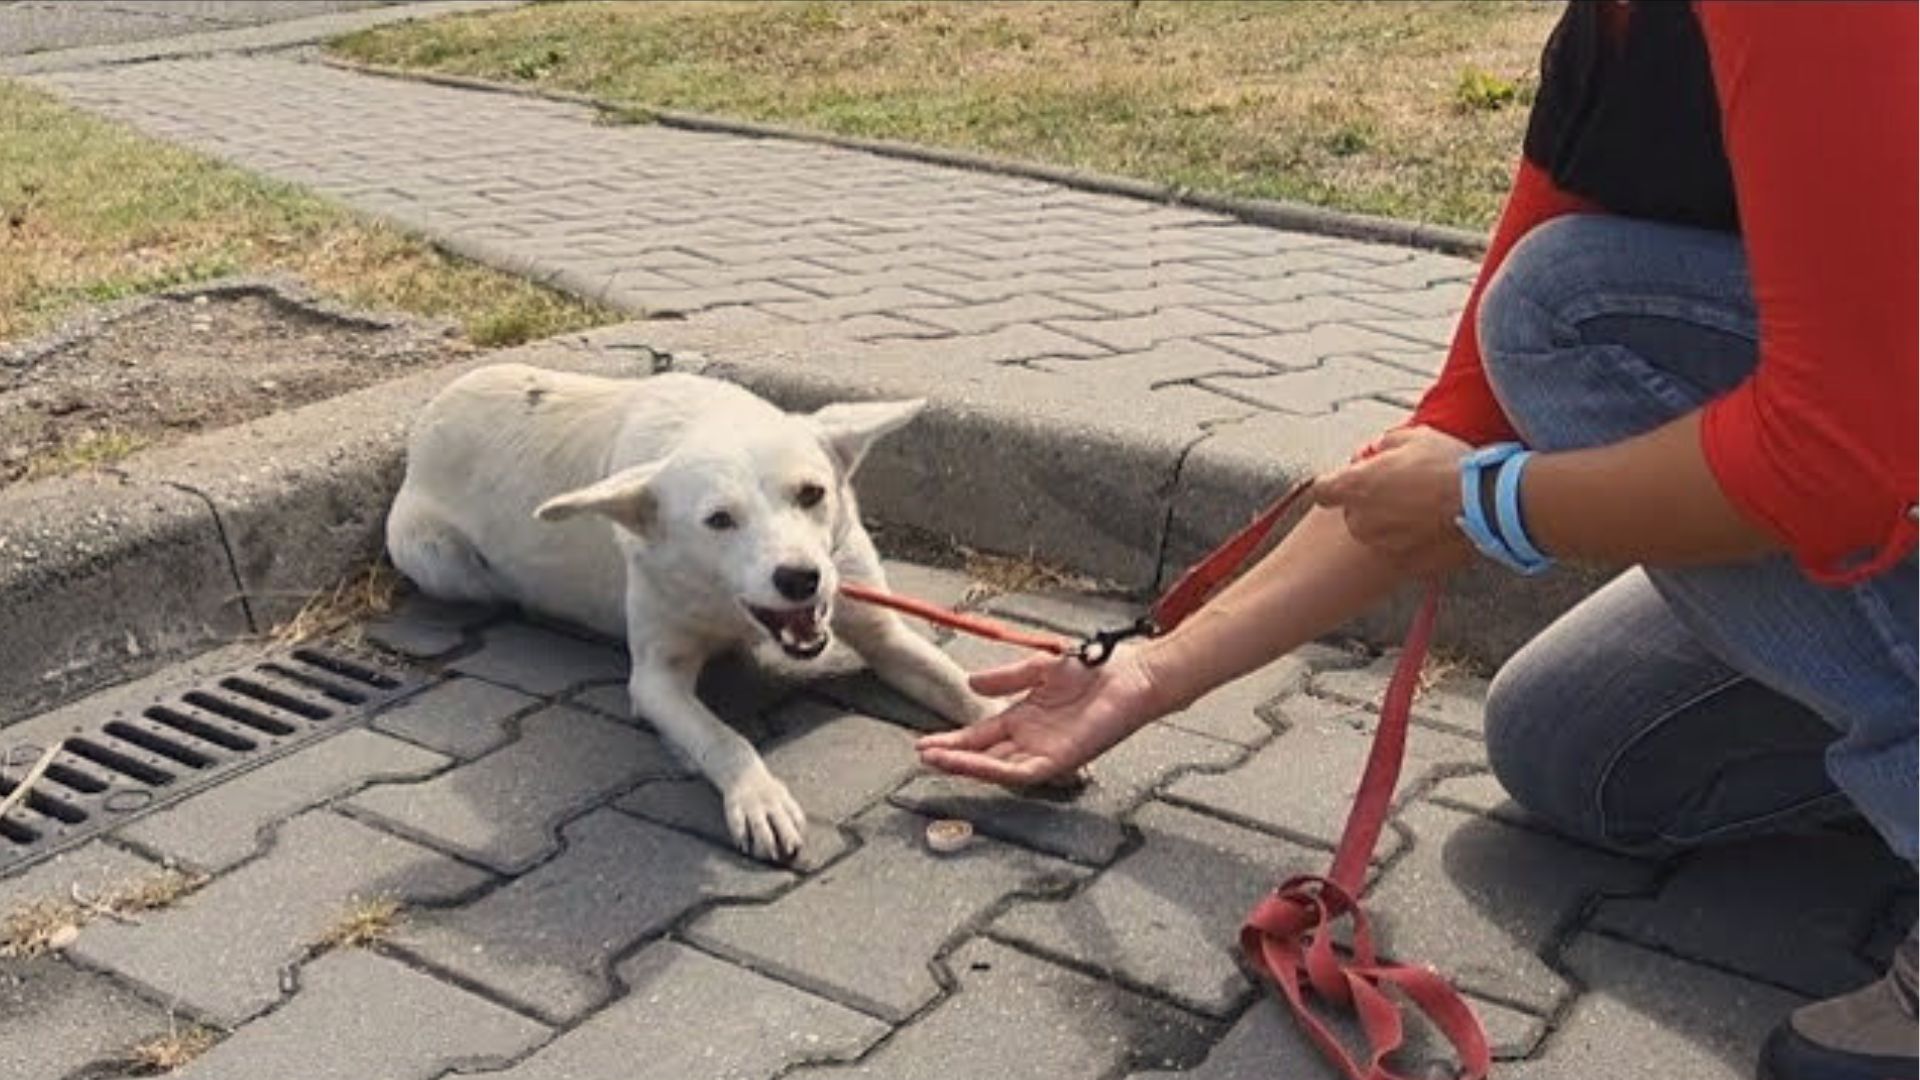 Stray Dog Follows Hoomans On Street Begging To Be Adopted